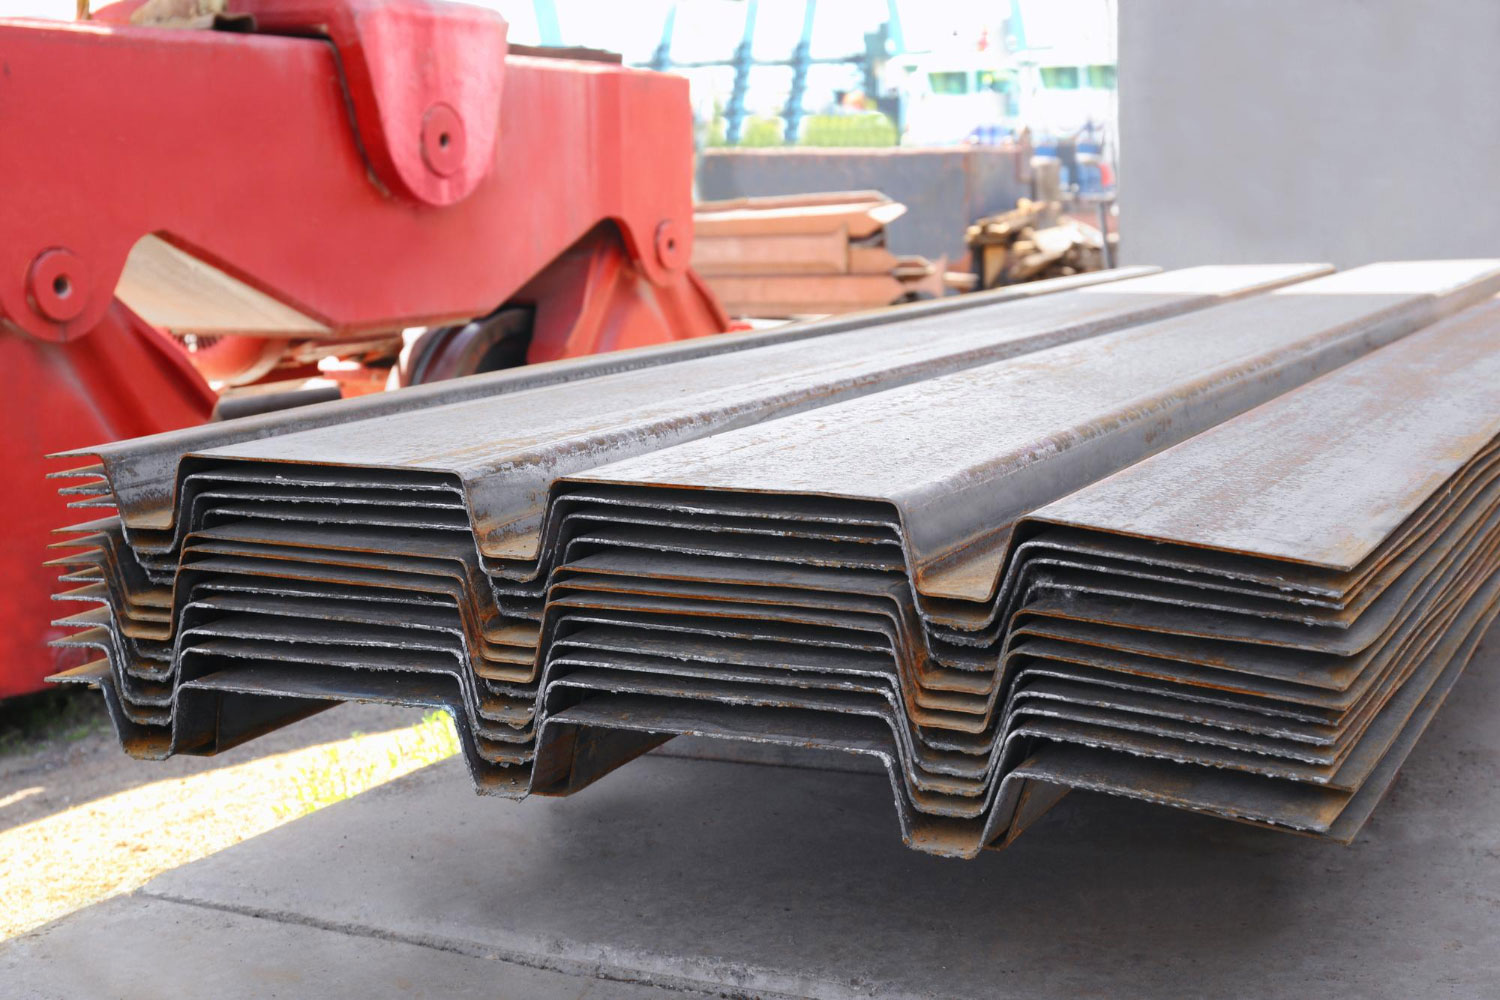 Contiguous Steel Sheet Piles: Structured Reinforcement for Robust Construction Projects